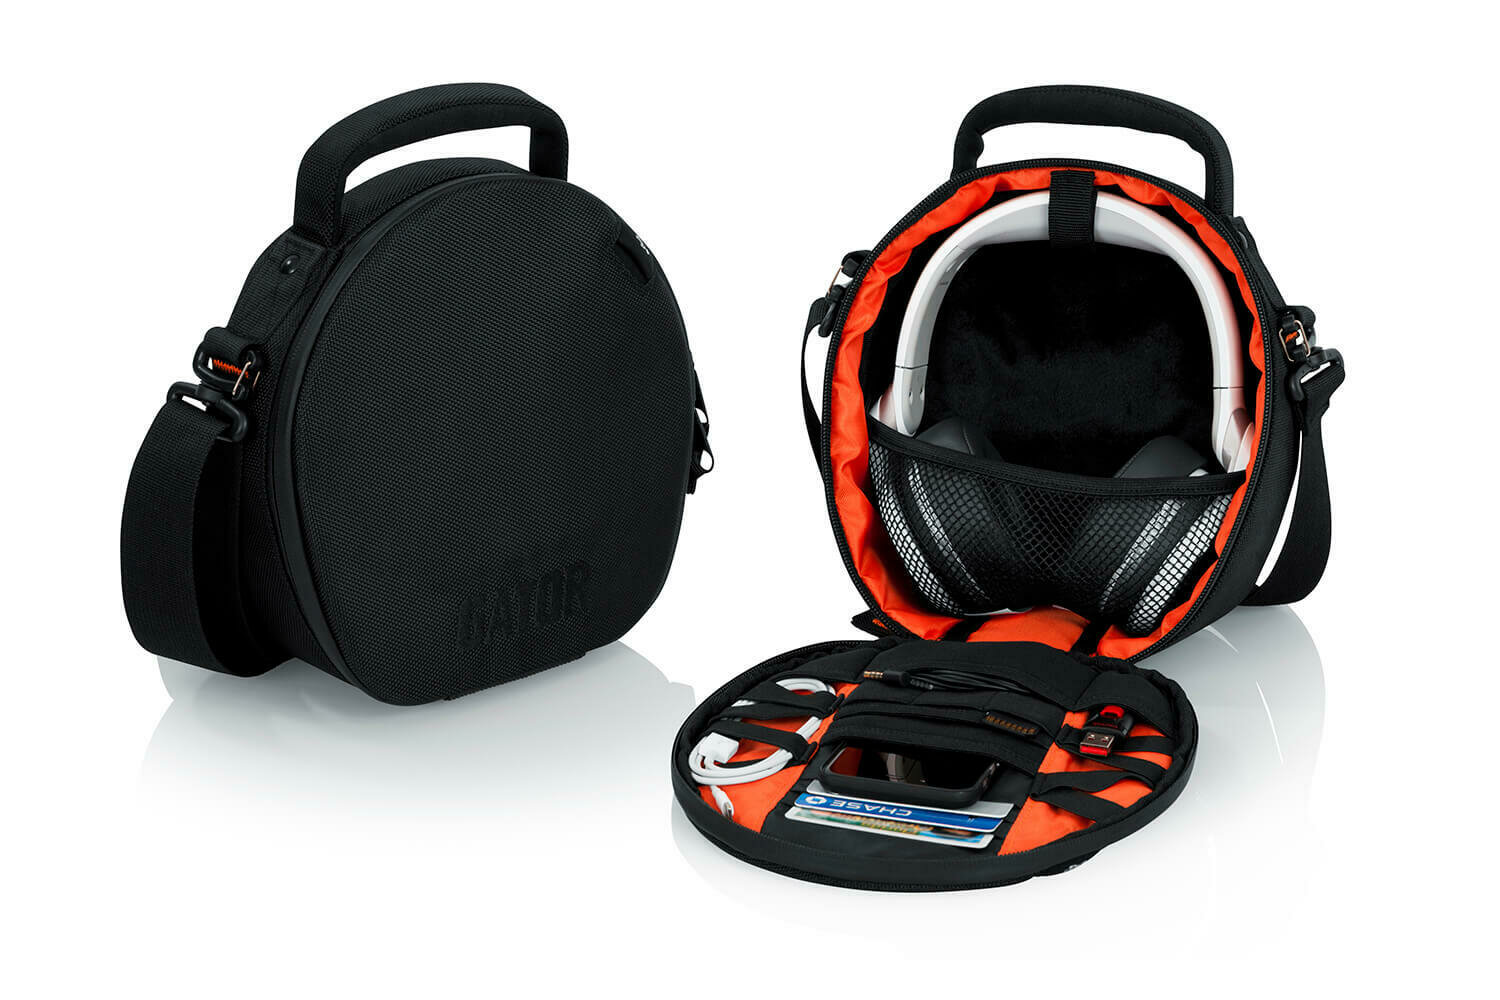 Gator G-Club Series Carry Case for DJ-Style Headphones and Accessories
#GAGCLUBHDPHN MFR #G-CLUB-HEADPHONE